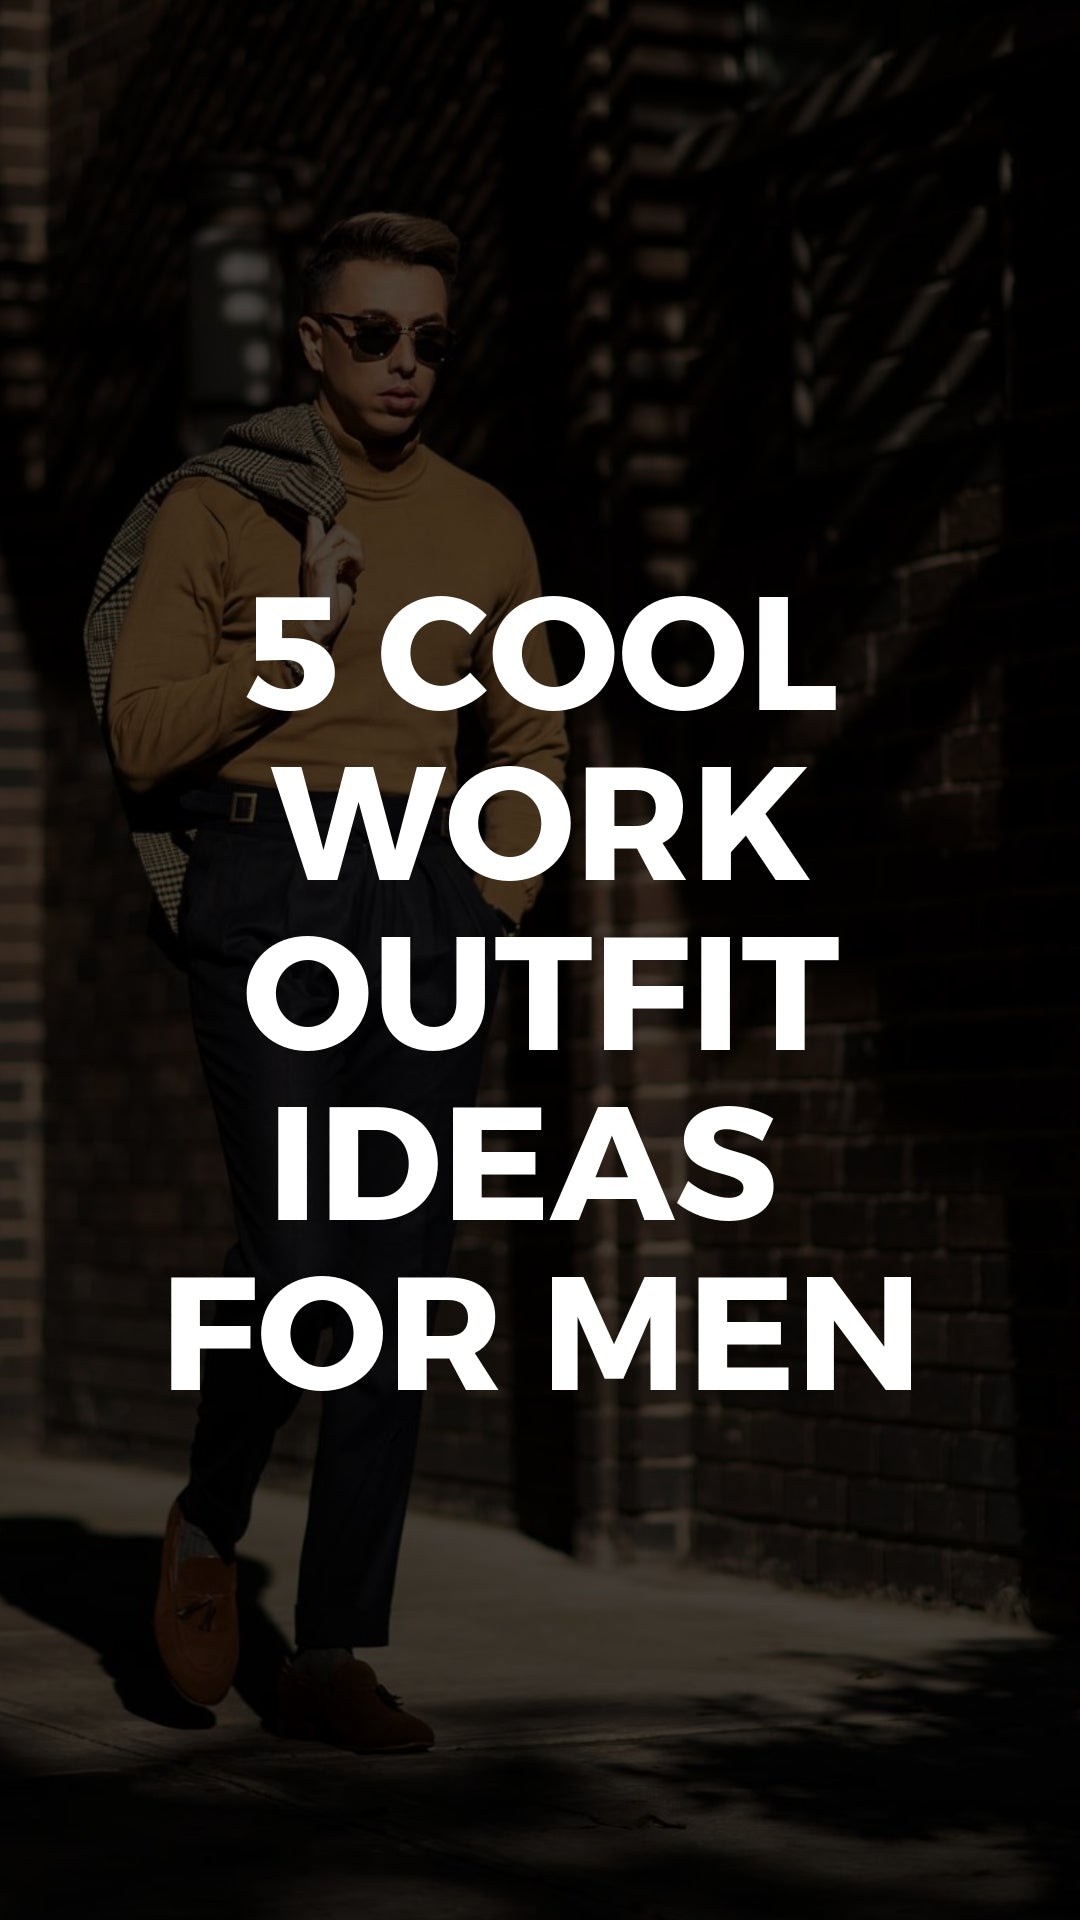 This Is Where I Go For Truly Edgy Work Outfit Ideas #workwear #businesscasual #outfits #mensfashion #streetstyle